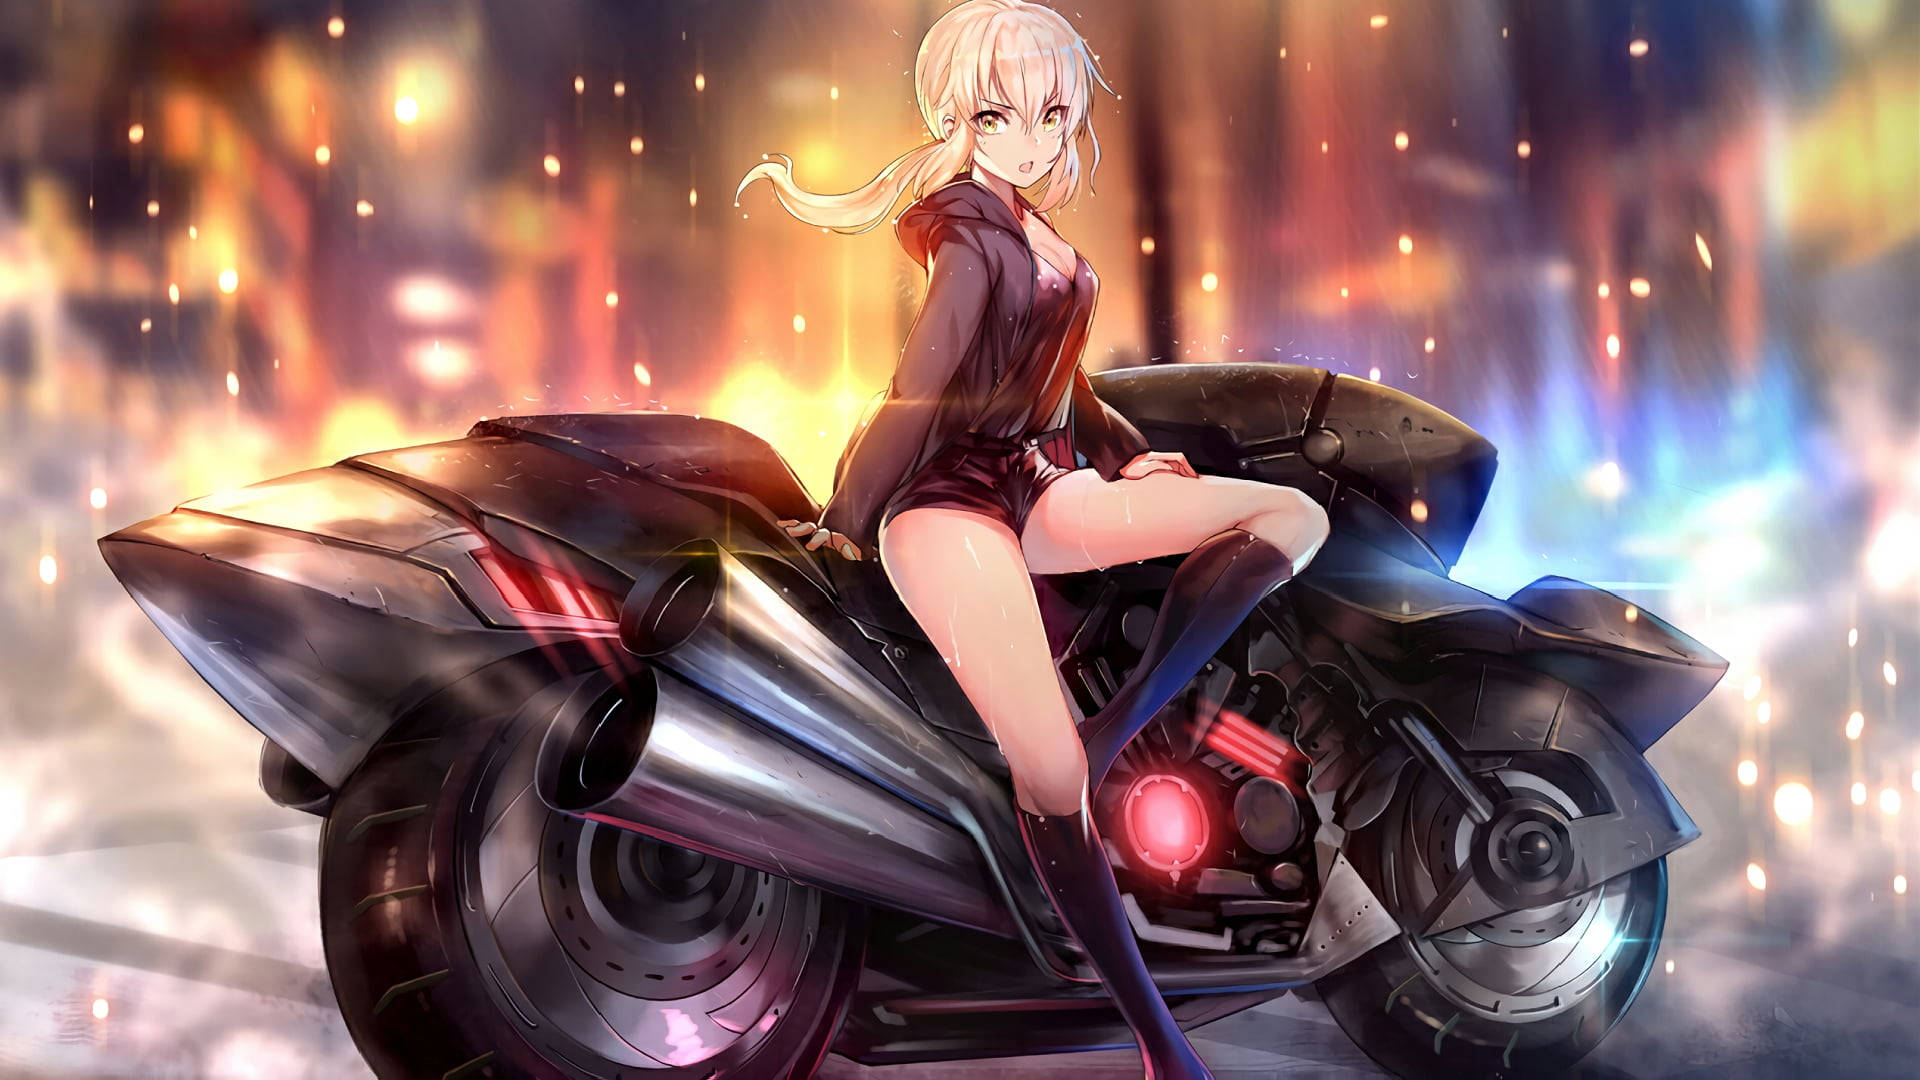 Download Mujeres Calientes Anime In Motorcycle Wallpaper